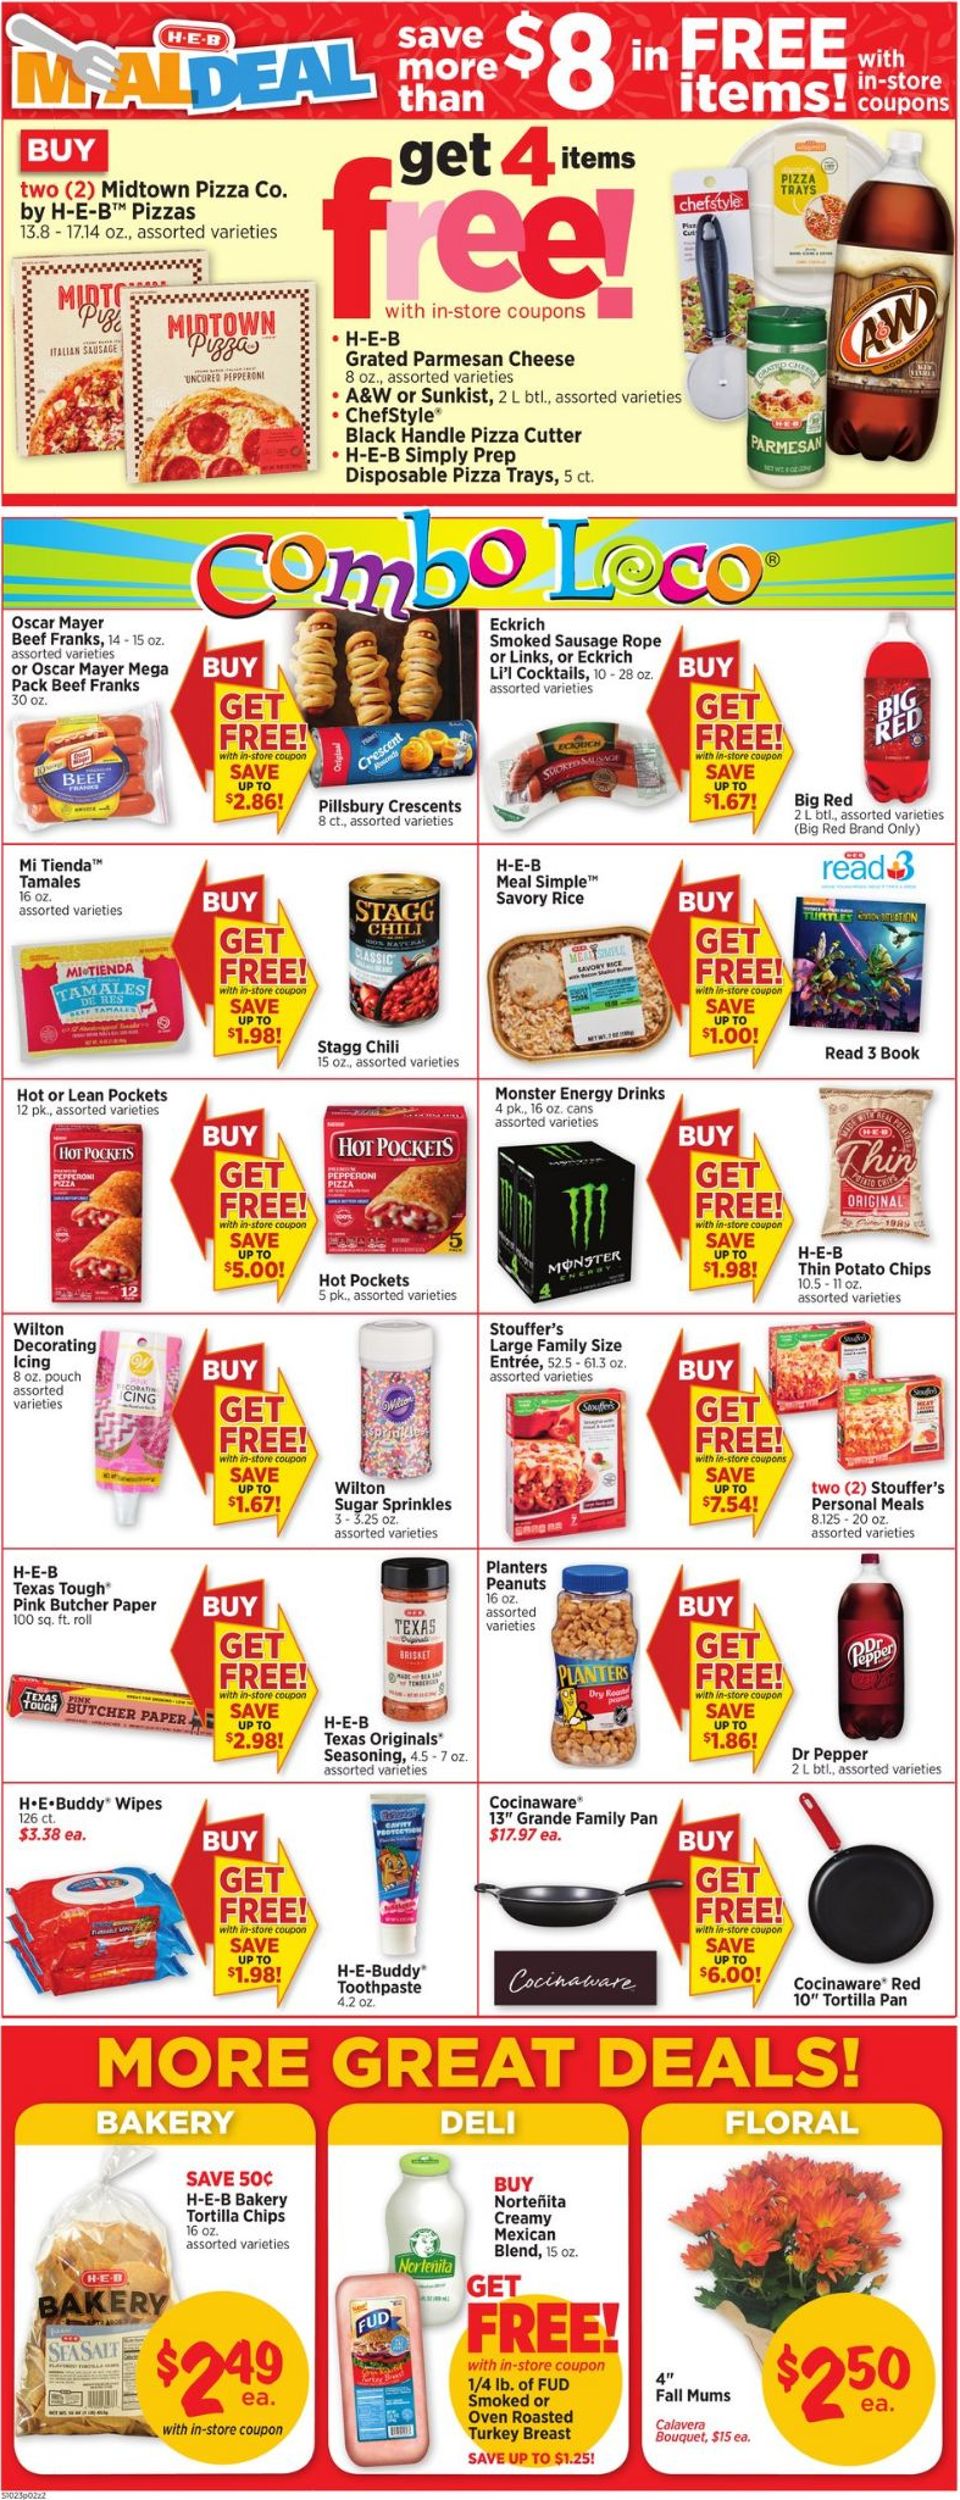 H-E-B Current weekly ad 10/23 - 10/29/2019 4 - frequent ...